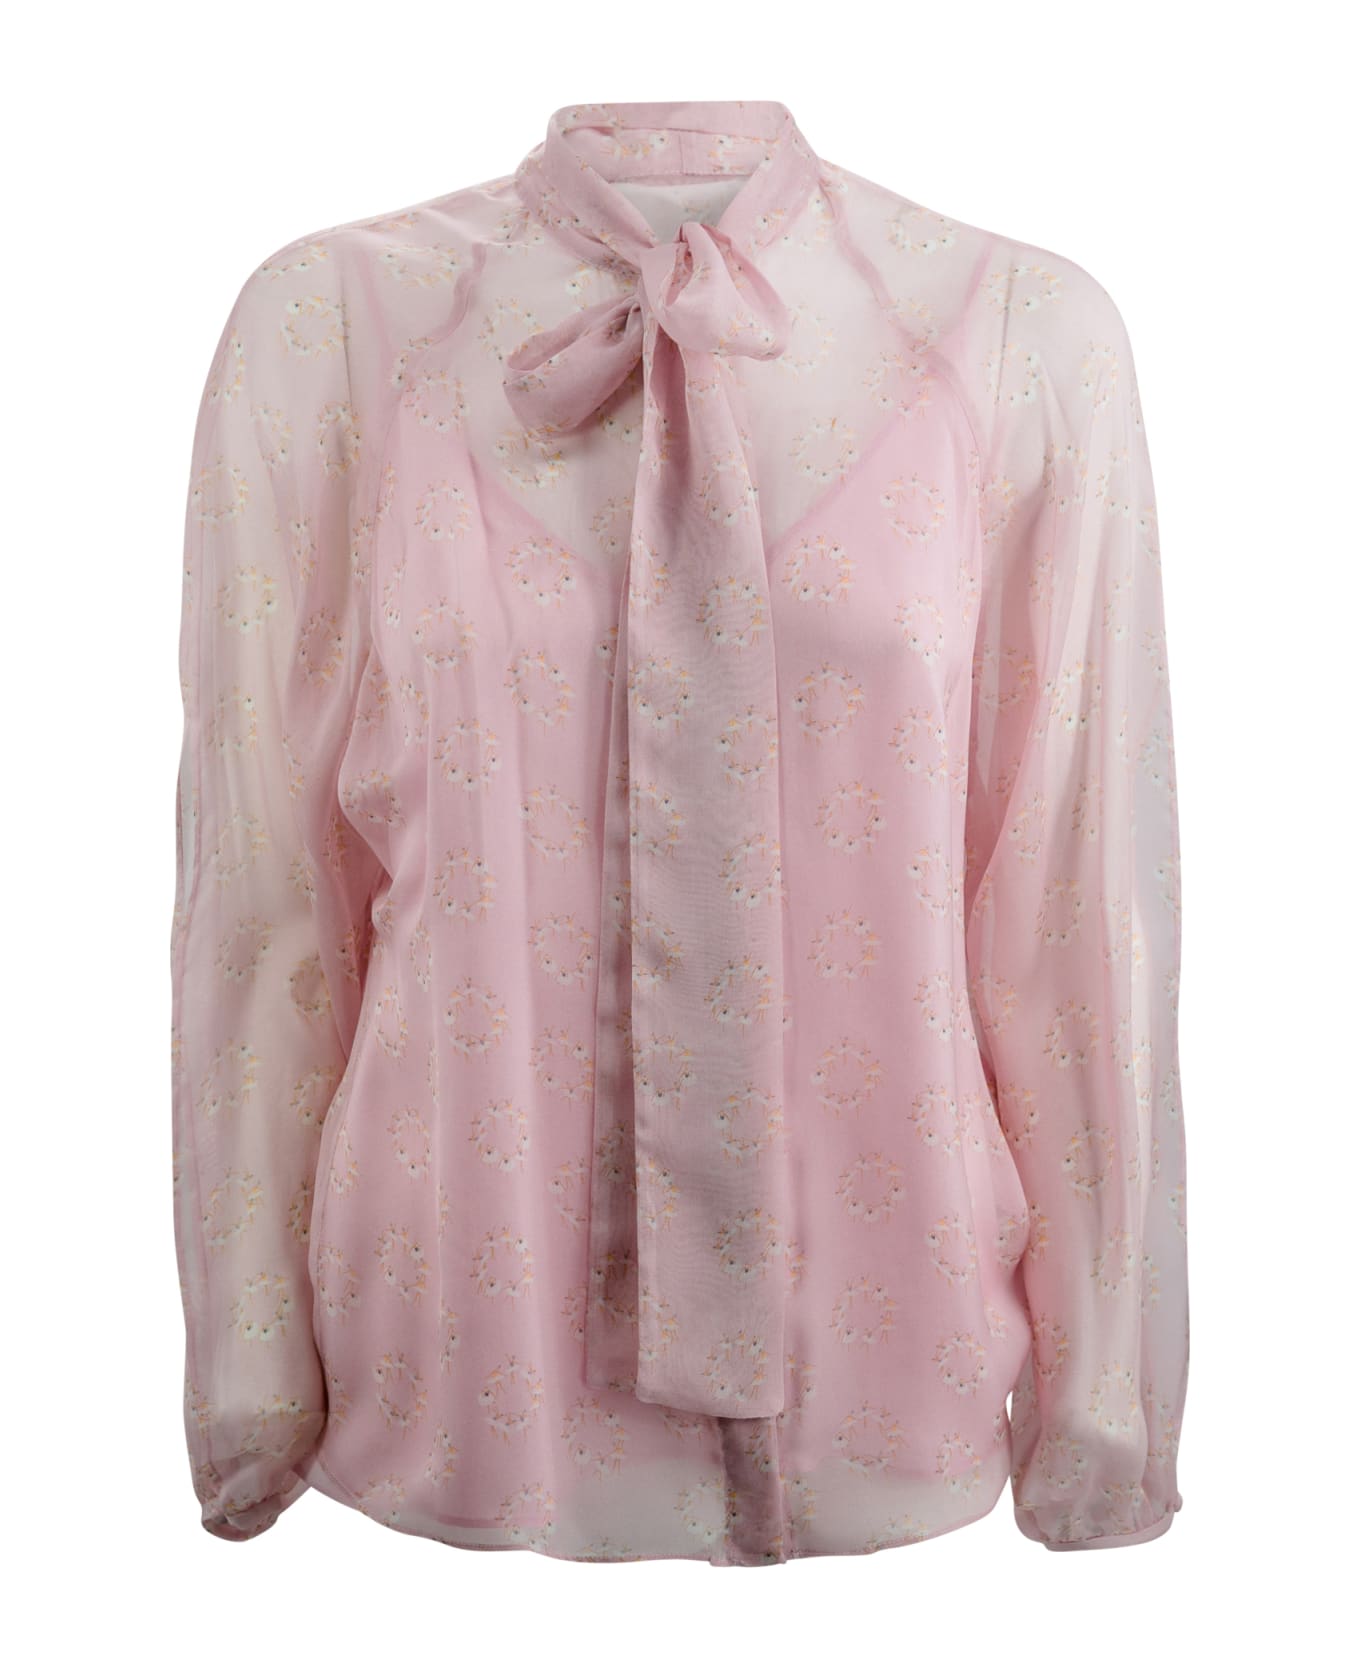 Max Mara Studio Georgette Blouse With Bow - Pink